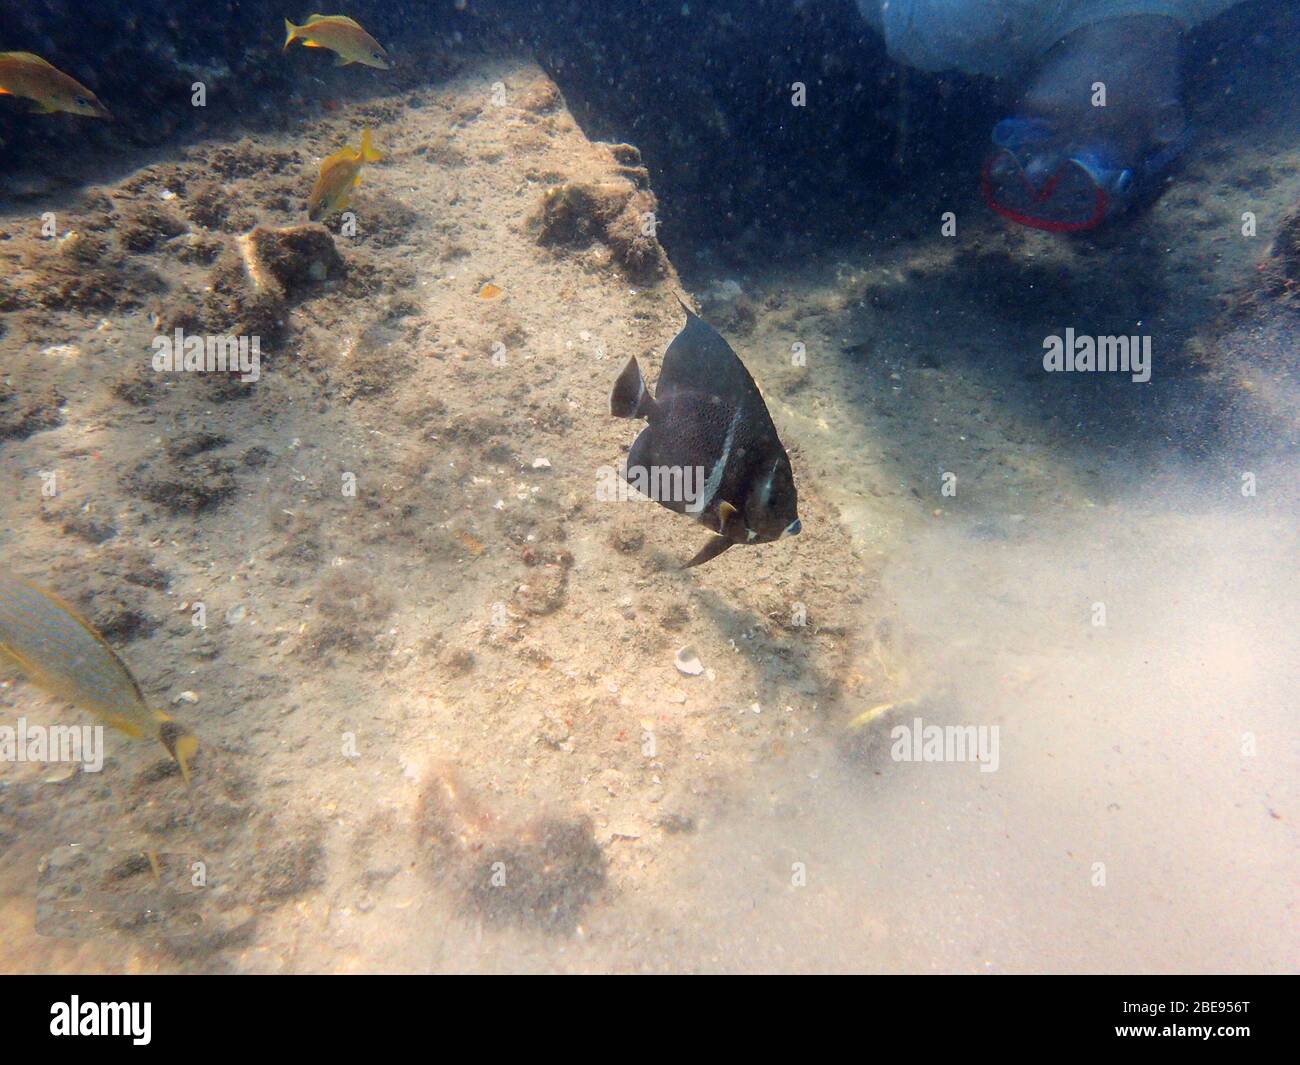 An underwater photo of a  grey angelfish swimming among the rocks and coral. Stock Photo